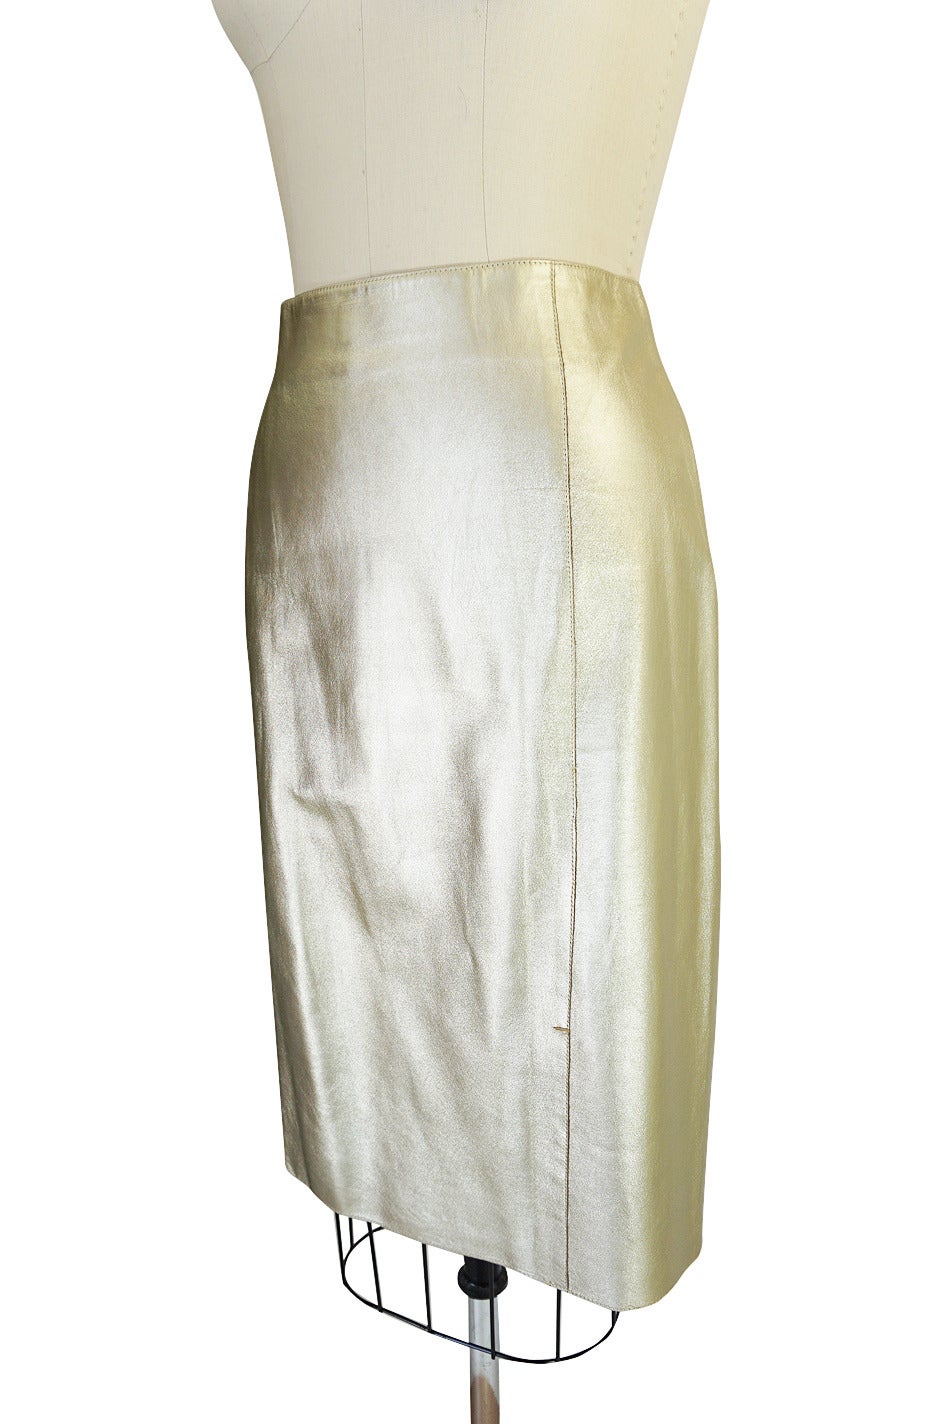 Women's Recent Prada Muted Gold Fine Leather Skirt For Sale